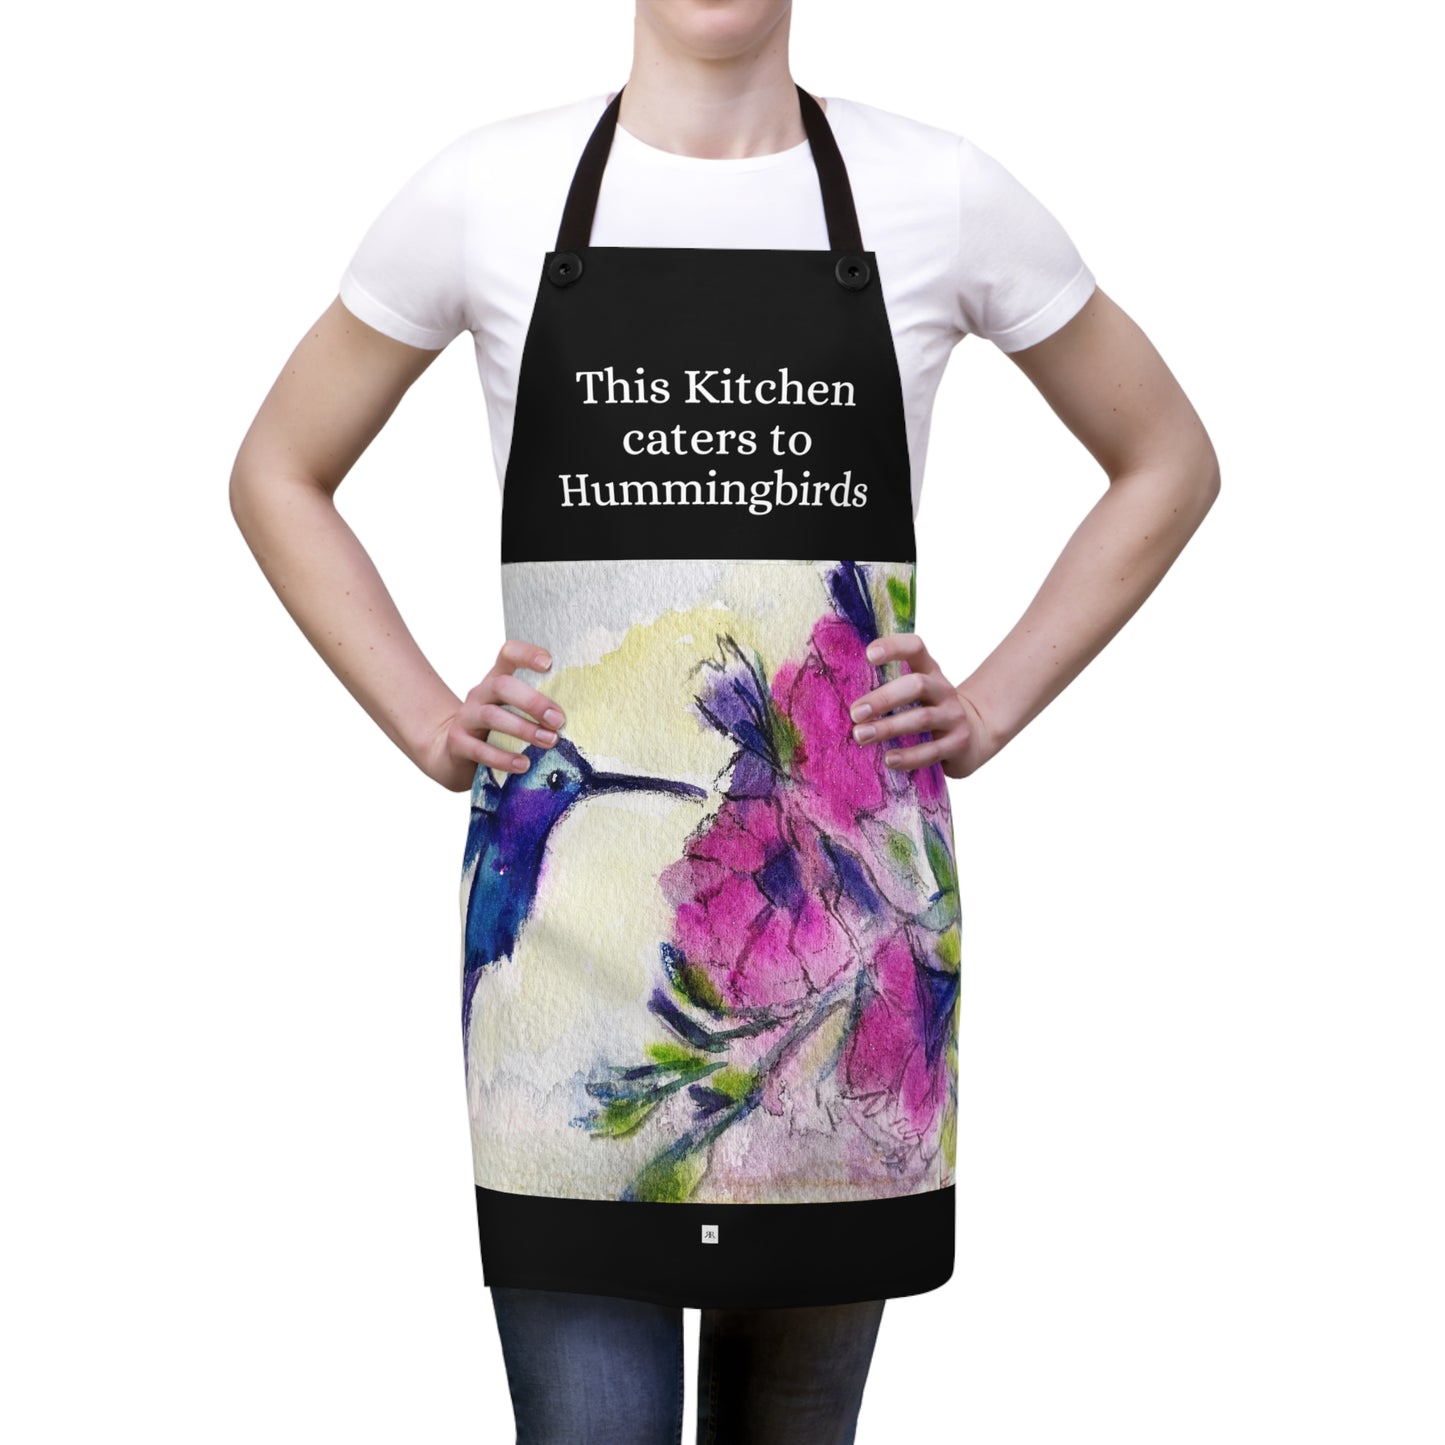 Hummingbird with Pink Flowers "This Kitchen caters to Hummingbirds" Apron